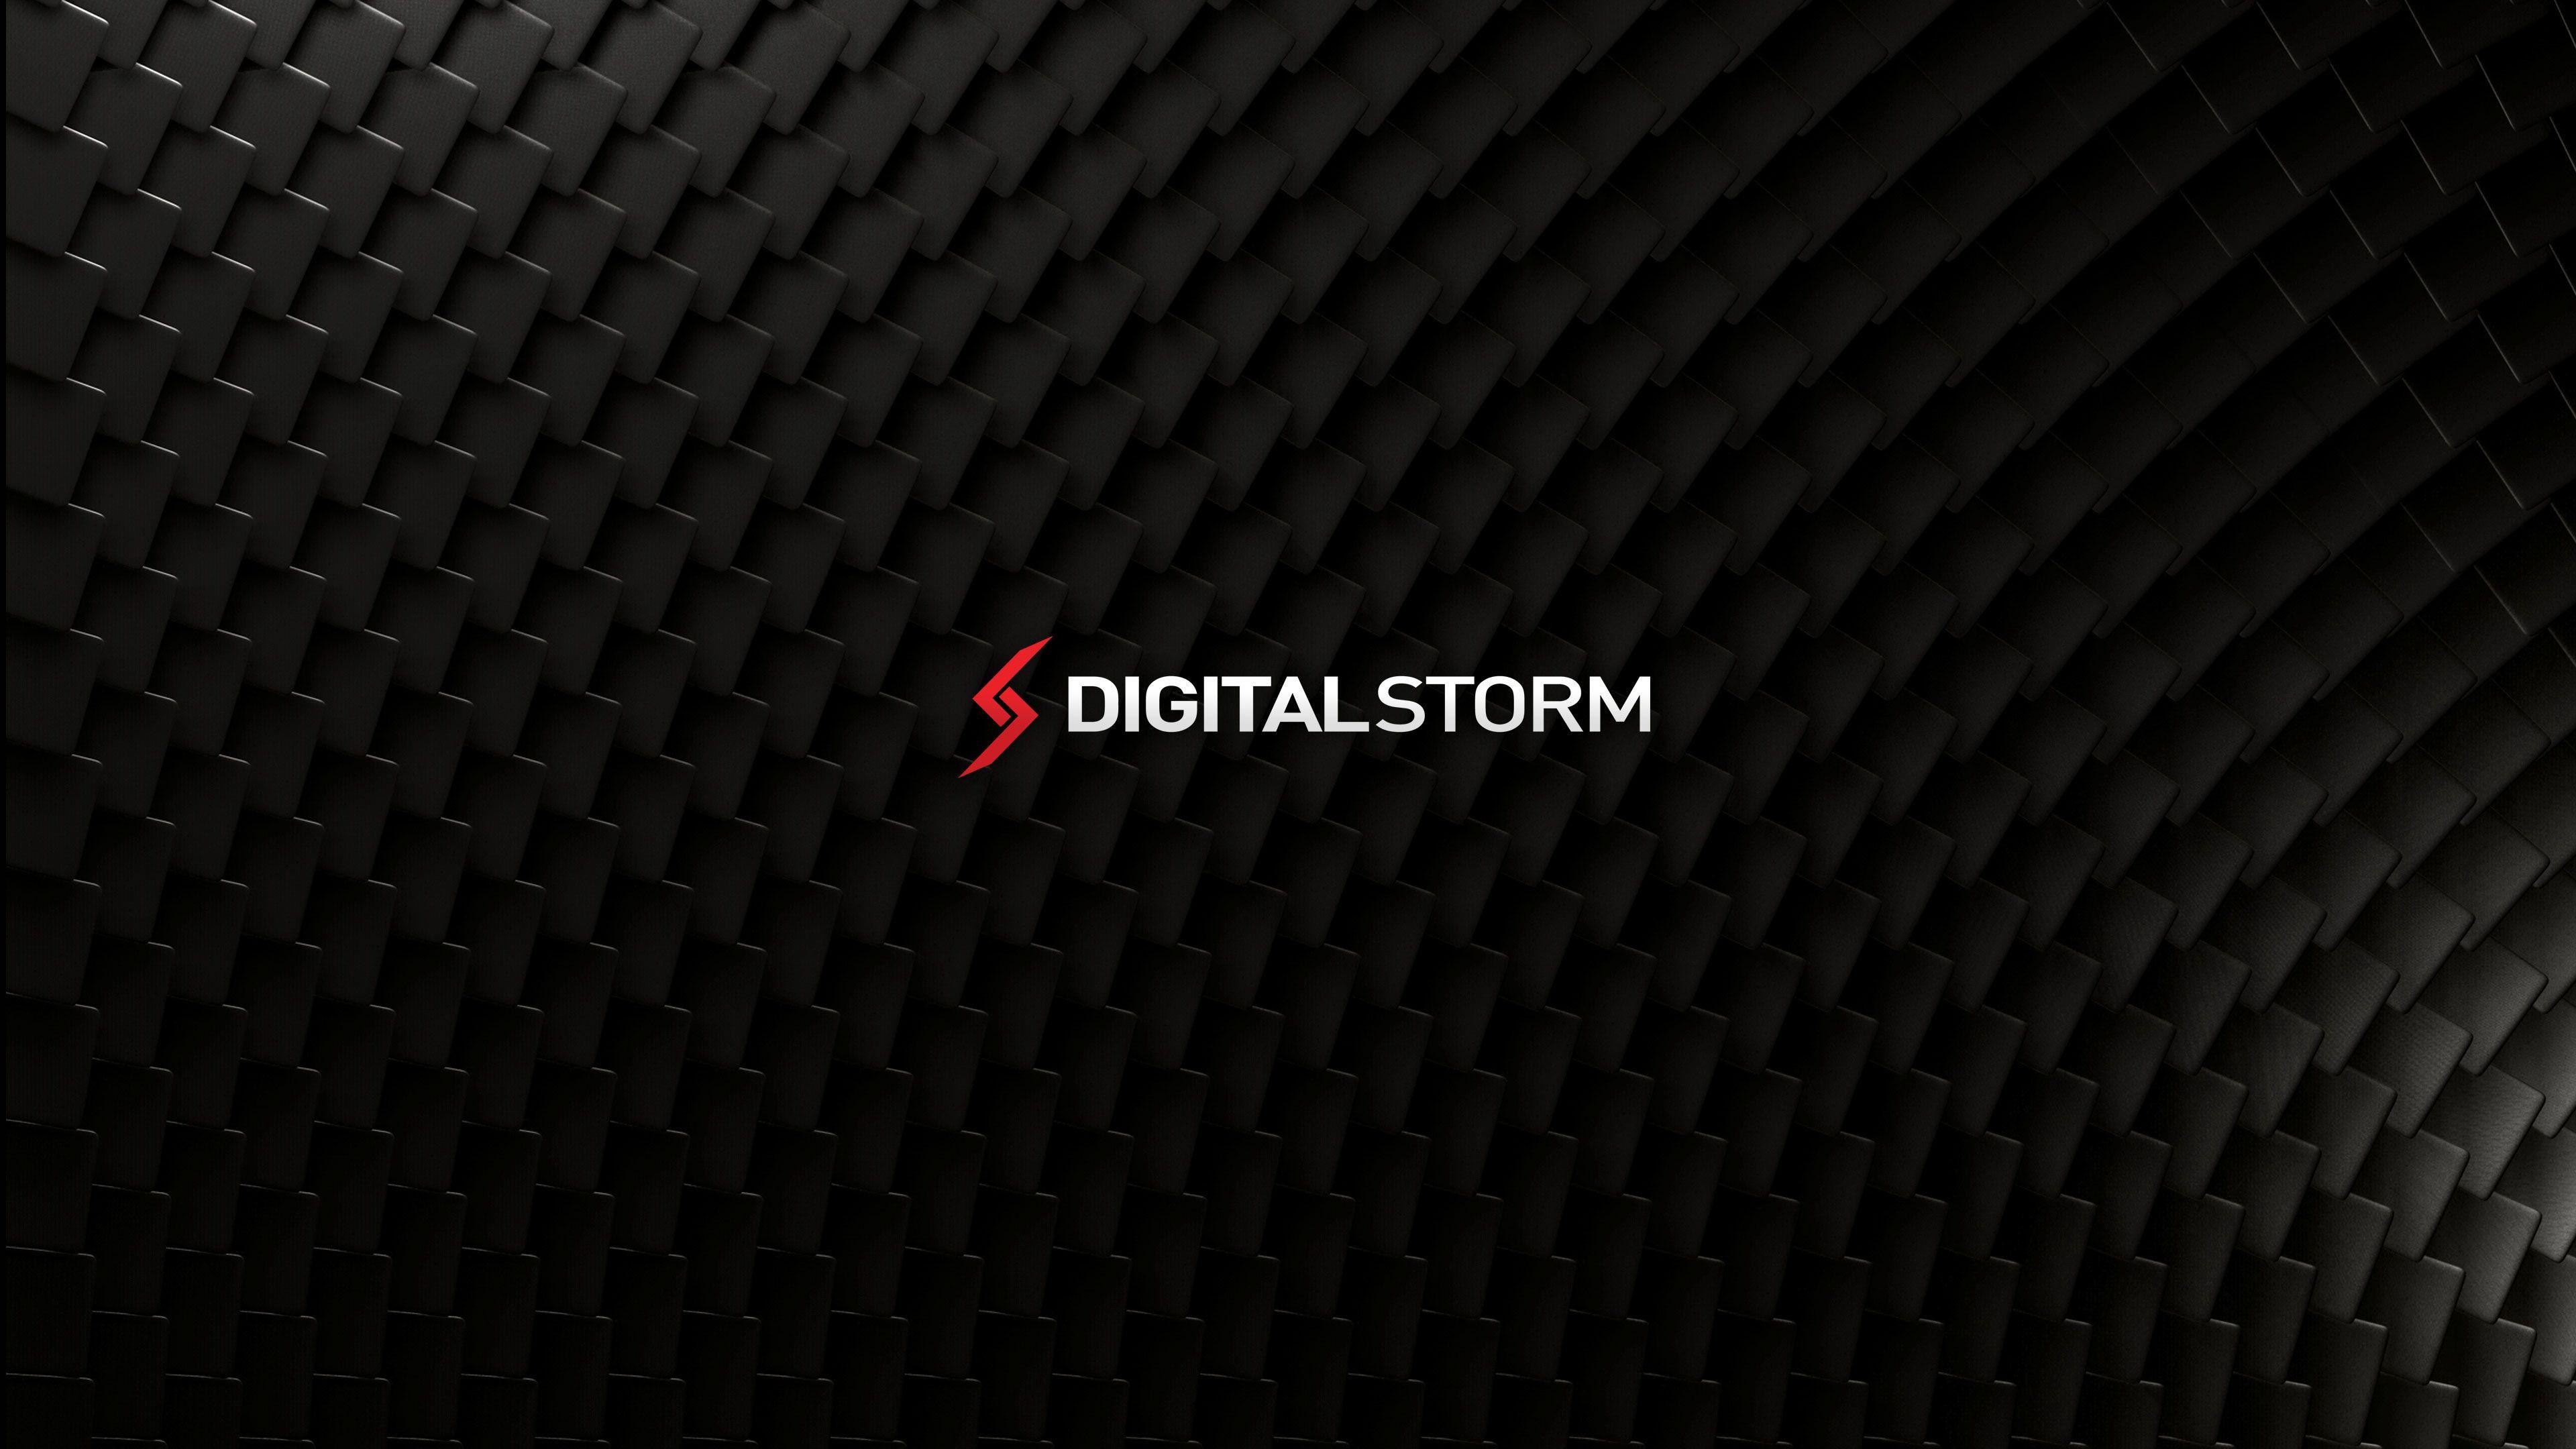 Red and Black Gamer Logo - Gaming Wallpapers, Backgrounds, Logos, & Downloads - Digital Storm